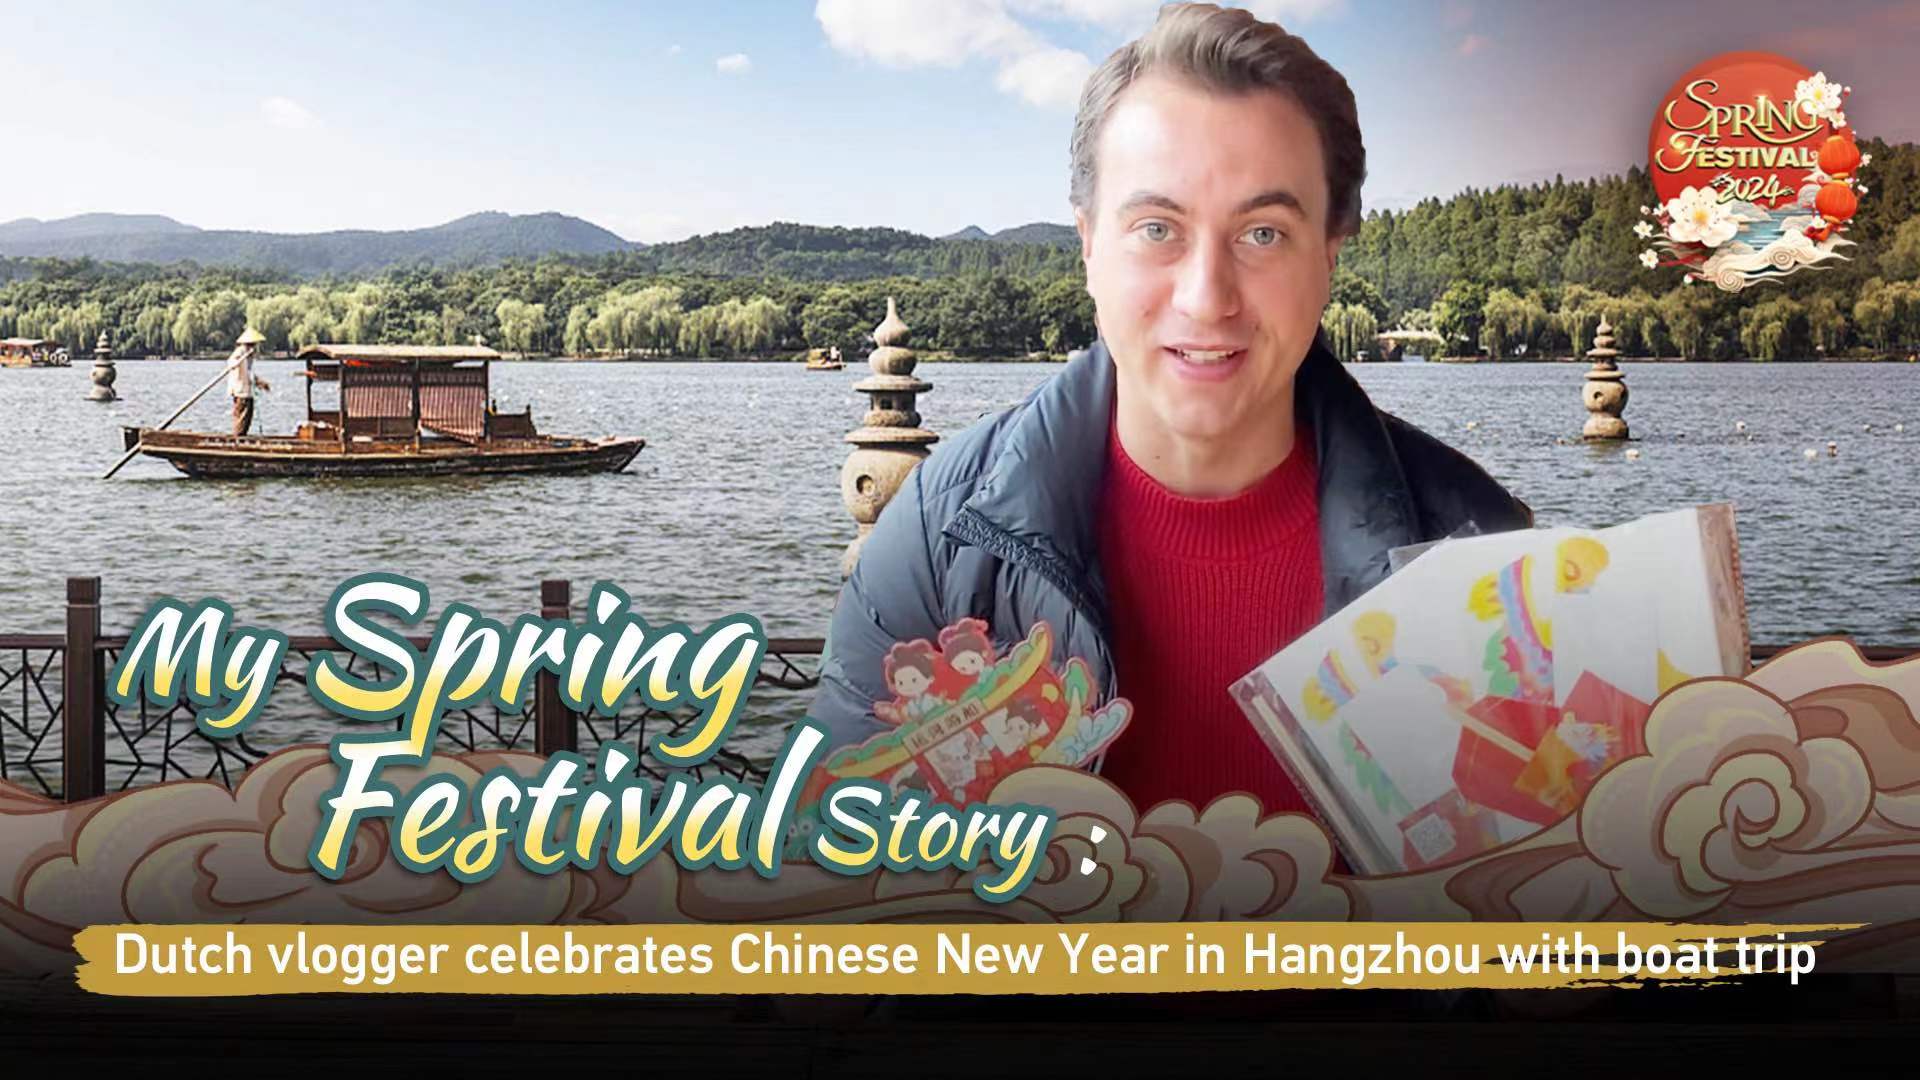 Dutch vlogger celebrates Chinese New Year in Hangzhou with boat trip